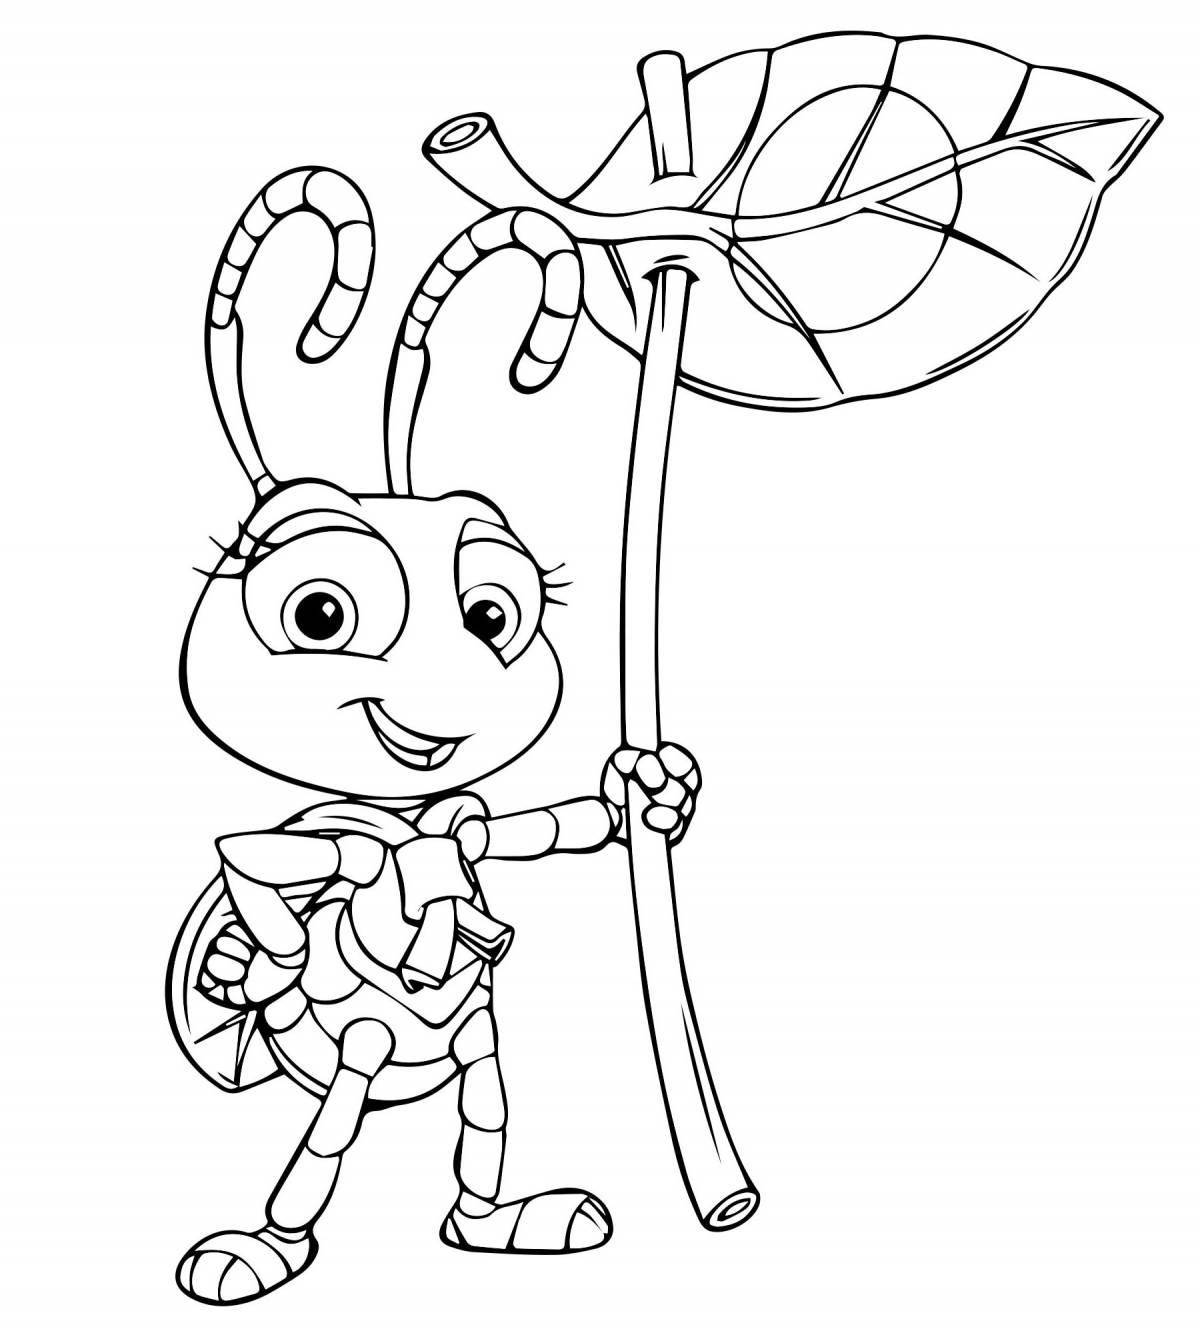 Glowing firefly coloring page